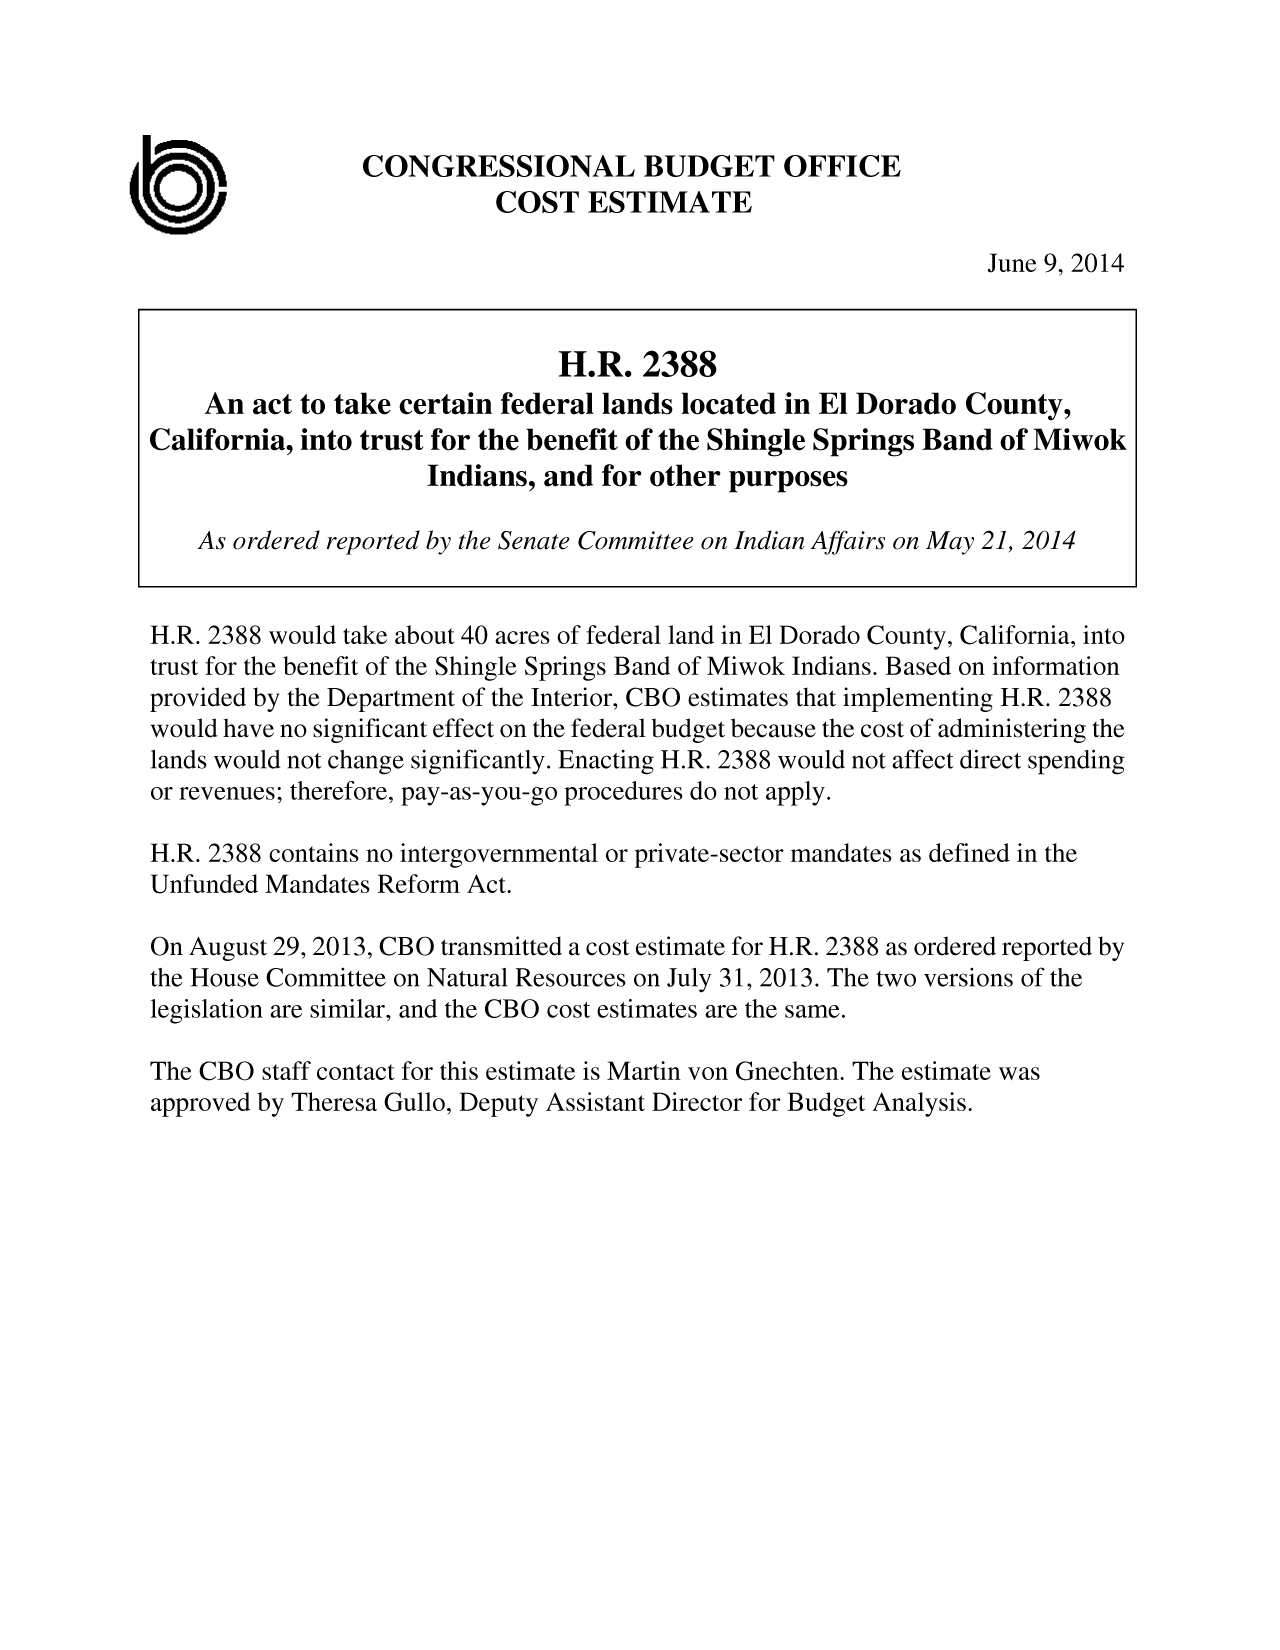 handle is hein.congrec/cbo1702 and id is 1 raw text is: CONGRESSIONAL BUDGET OFFICE
COST ESTIMATE

June 9, 2014

H.R. 2388
An act to take certain federal lands located in El Dorado County,
California, into trust for the benefit of the Shingle Springs Band of Miwok
Indians, and for other purposes
As ordered reported by the Senate Committee on Indian Affairs on May 21, 2014
H.R. 2388 would take about 40 acres of federal land in El Dorado County, California, into
trust for the benefit of the Shingle Springs Band of Miwok Indians. Based on information
provided by the Department of the Interior, CBO estimates that implementing H.R. 2388
would have no significant effect on the federal budget because the cost of administering the
lands would not change significantly. Enacting H.R. 2388 would not affect direct spending
or revenues; therefore, pay-as-you-go procedures do not apply.
H.R. 2388 contains no intergovernmental or private-sector mandates as defined in the
Unfunded Mandates Reform Act.
On August 29, 2013, CBO transmitted a cost estimate for H.R. 2388 as ordered reported by
the House Committee on Natural Resources on July 31, 2013. The two versions of the
legislation are similar, and the CBO cost estimates are the same.
The CBO staff contact for this estimate is Martin von Gnechten. The estimate was
approved by Theresa Gullo, Deputy Assistant Director for Budget Analysis.


